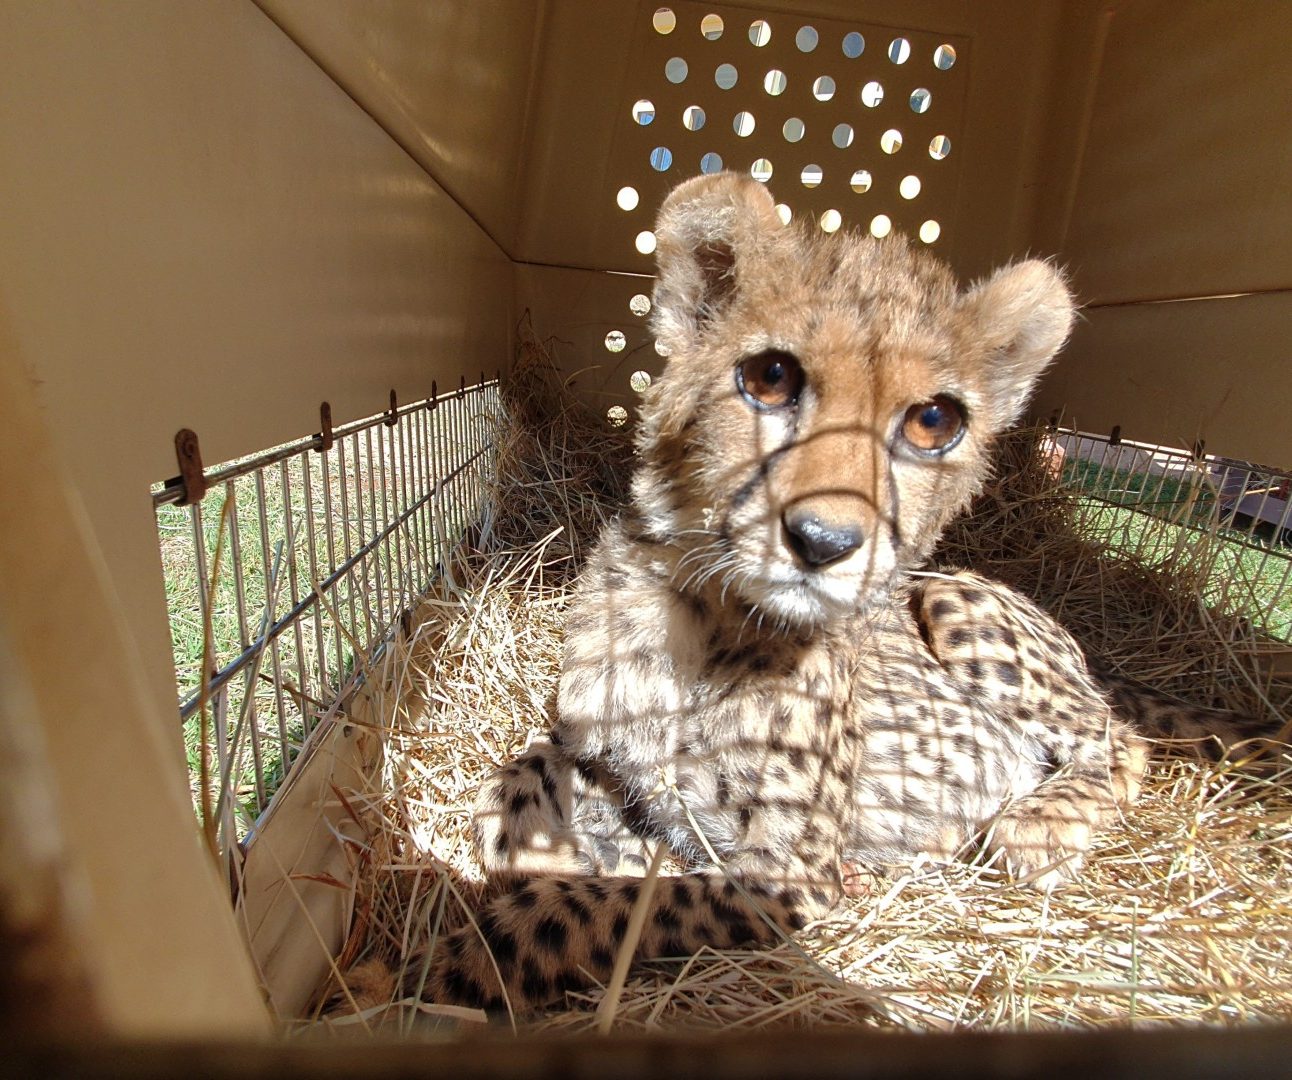 A young cheetah pictured inside a travel crate